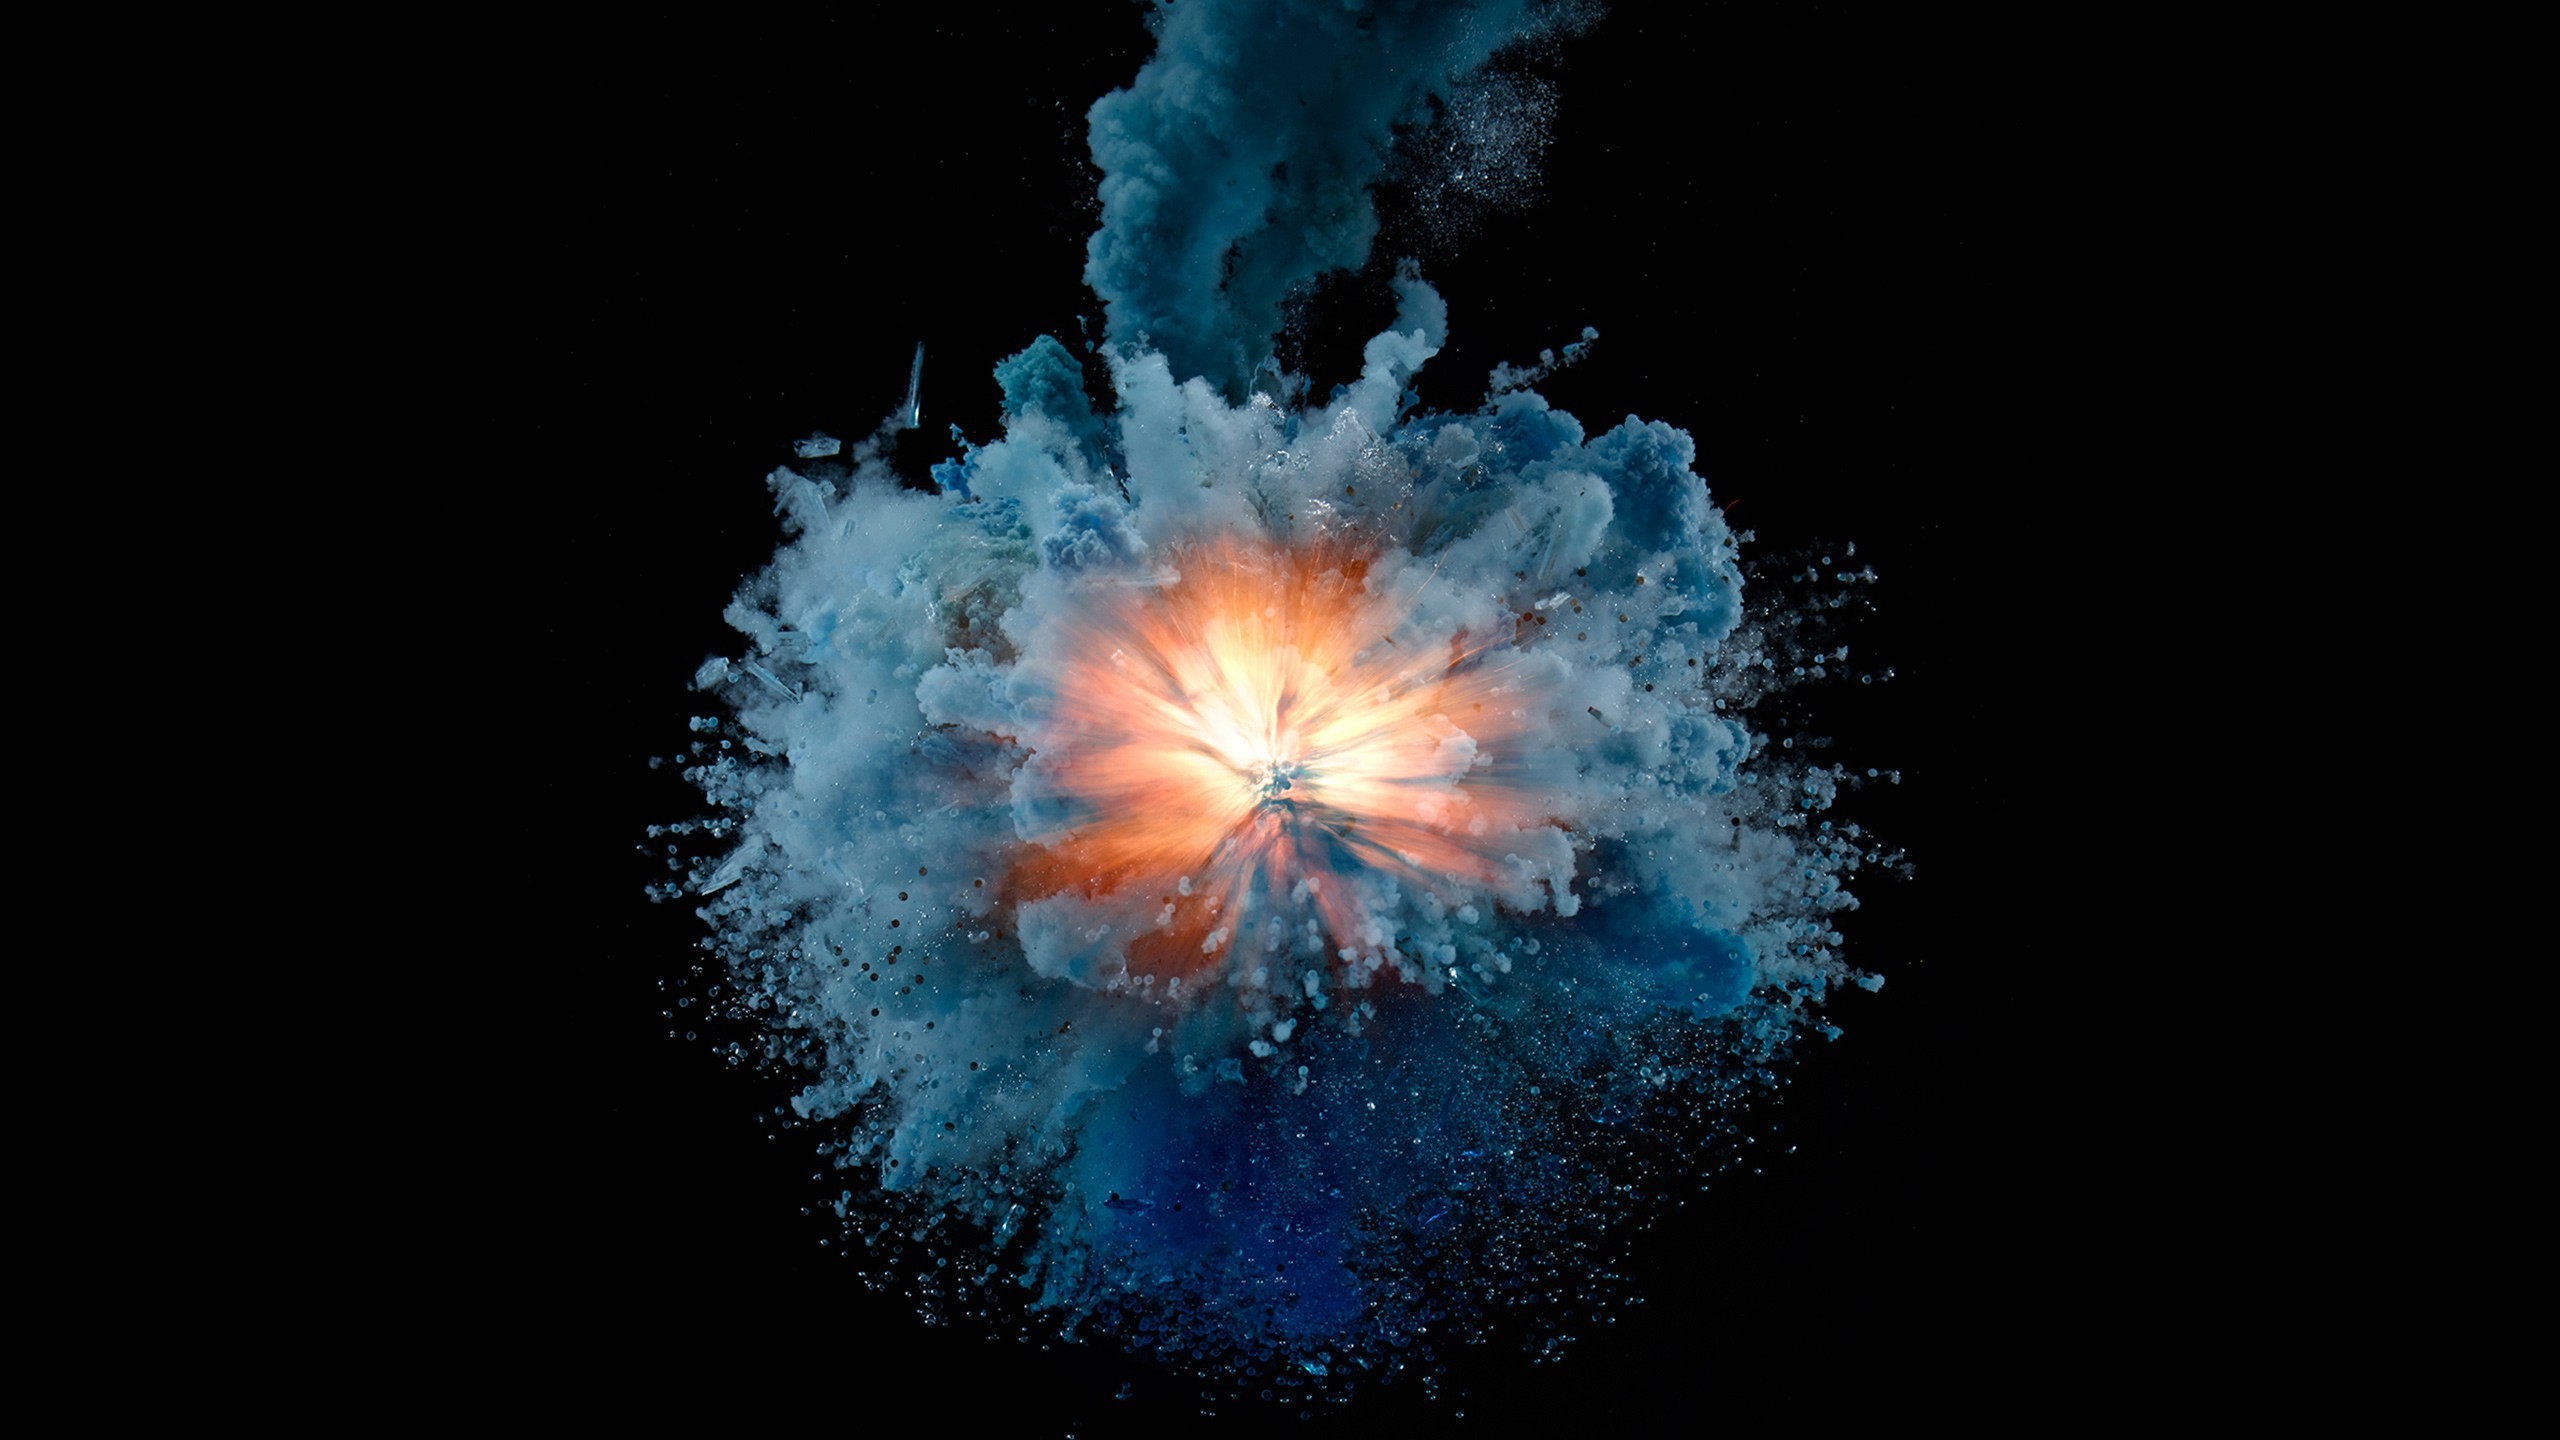 Inside Explosion Digital Art Simple Background Black Background Abstract 2560x1440